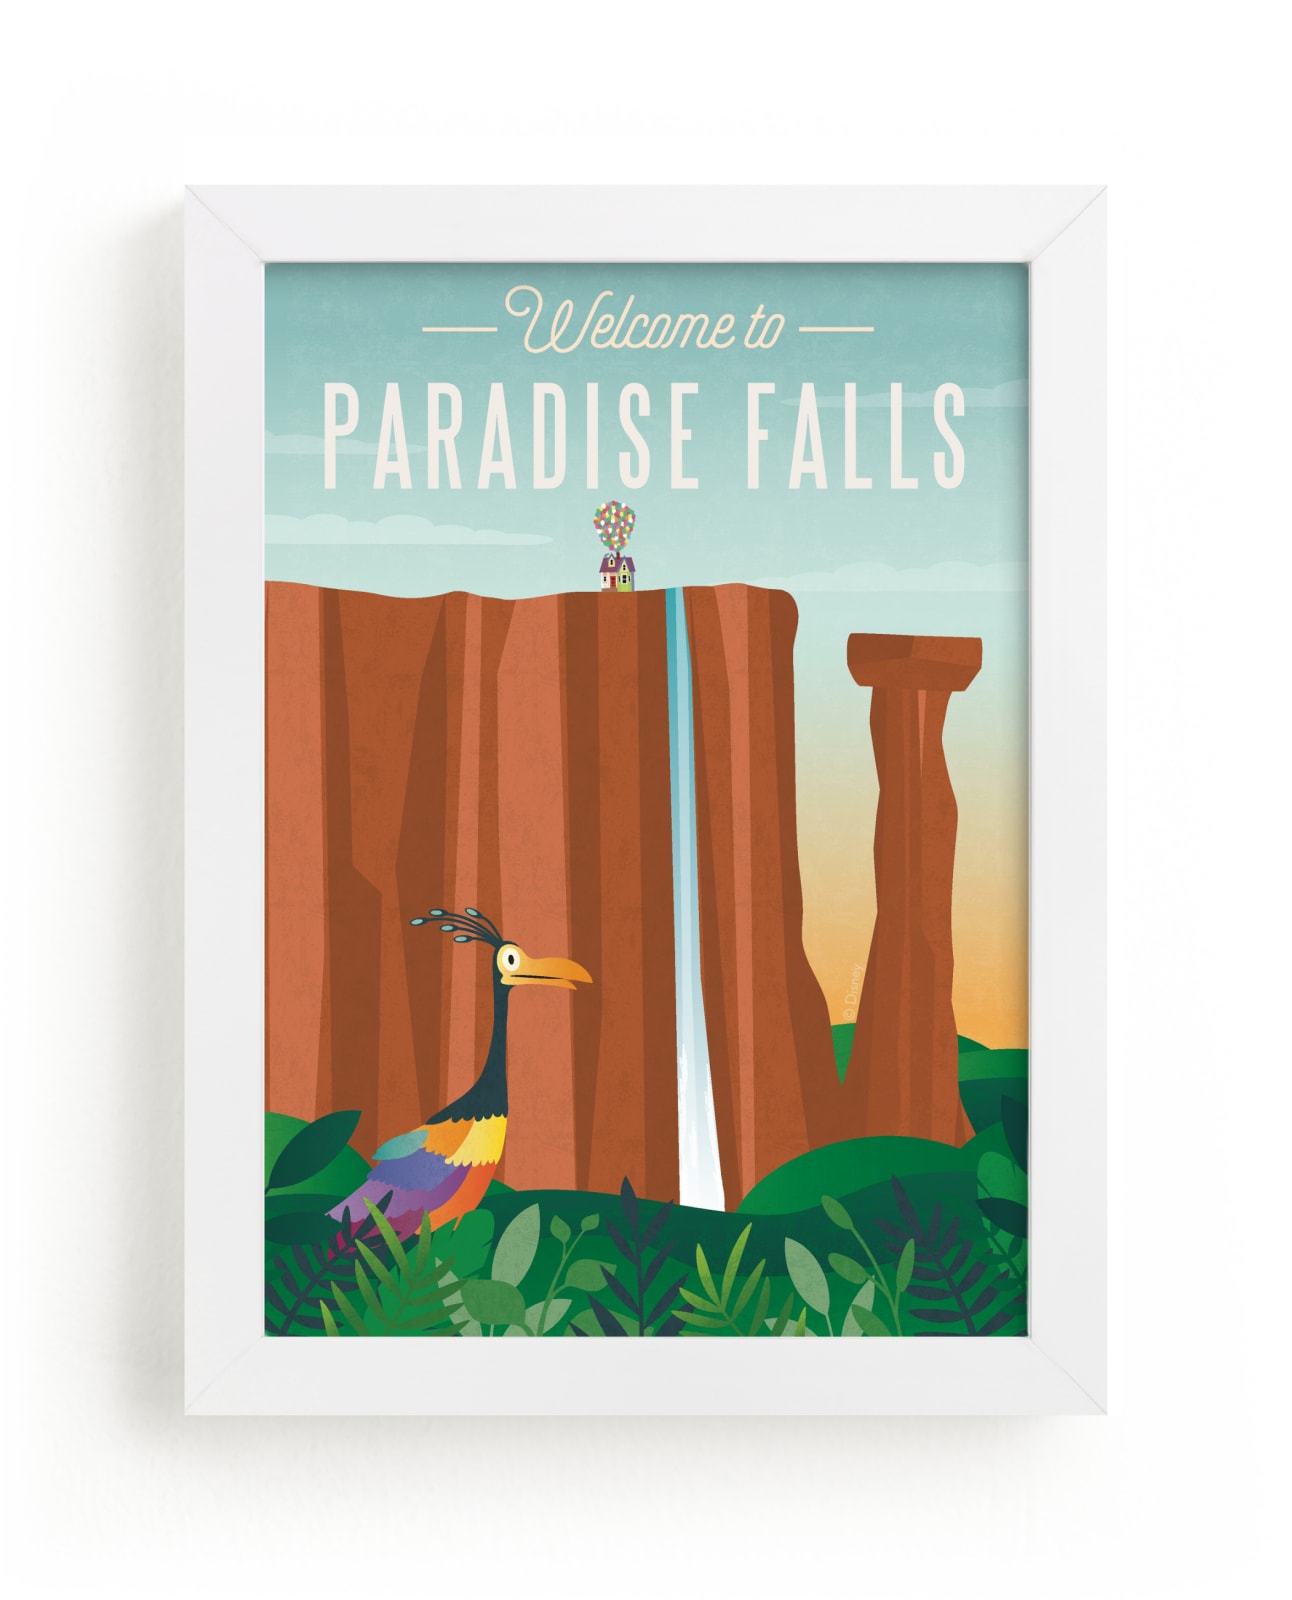 Welcome to Paradise Falls from Up | Krystek Disney and by Prints Disney Art Minted Pixar\'s Erica